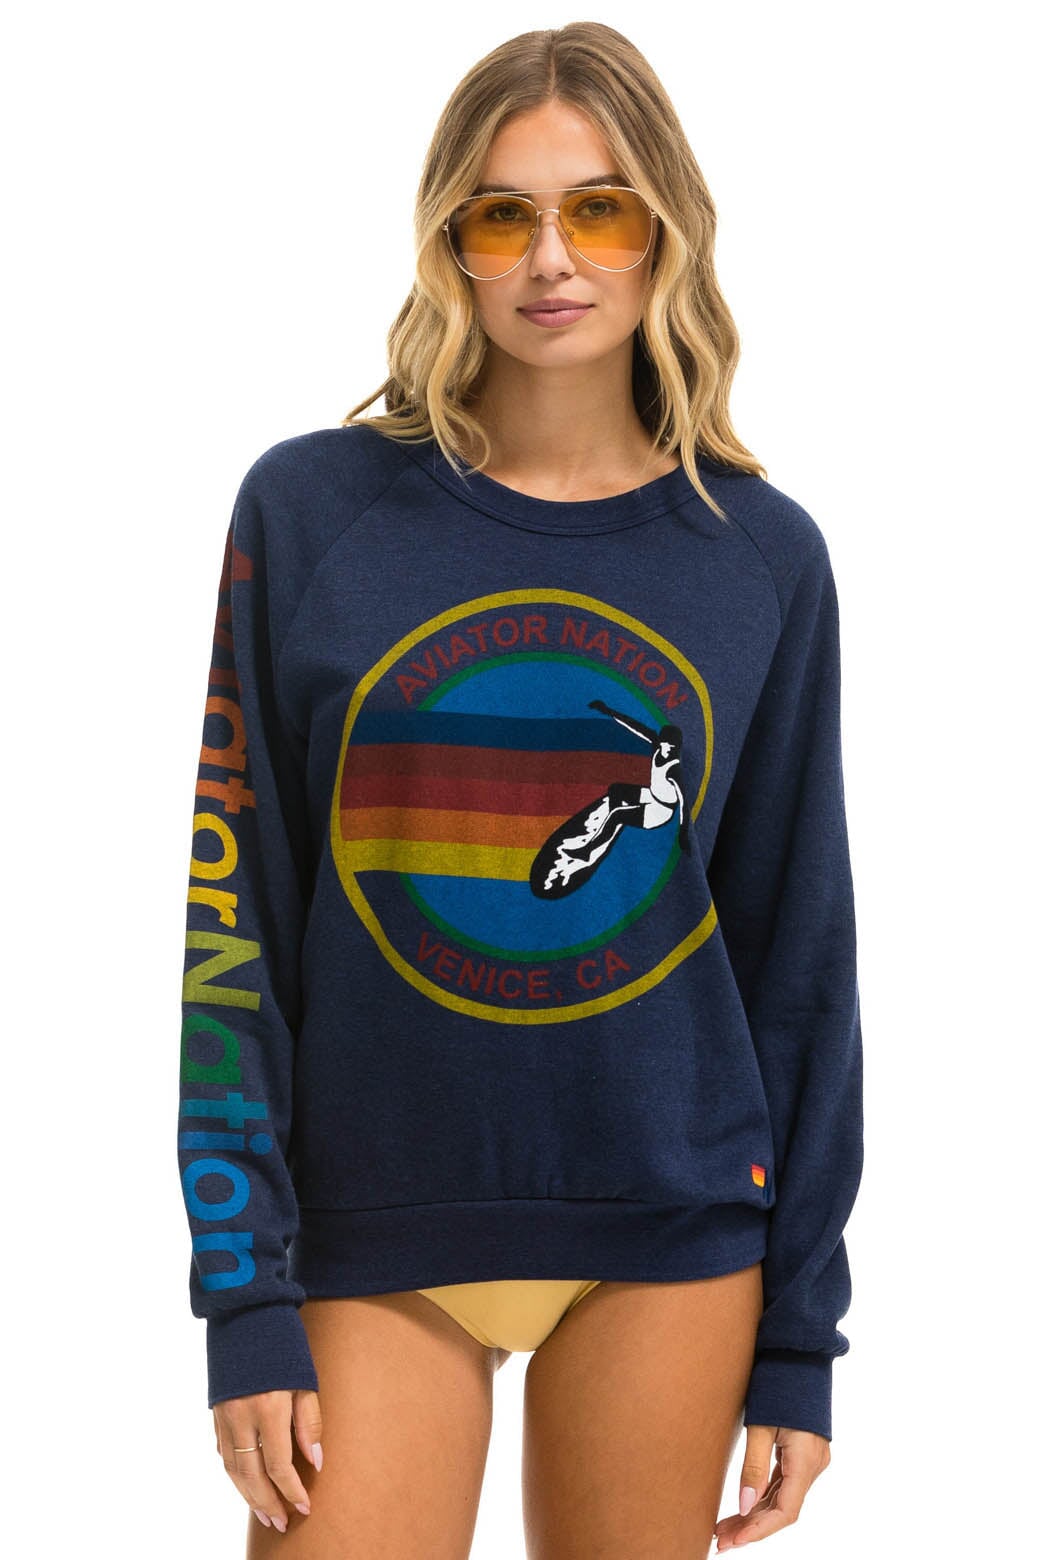 BOLT EMBROIDERY CLASSIC CROPPED CREW SWEATSHIRT - HEATHER NAVY